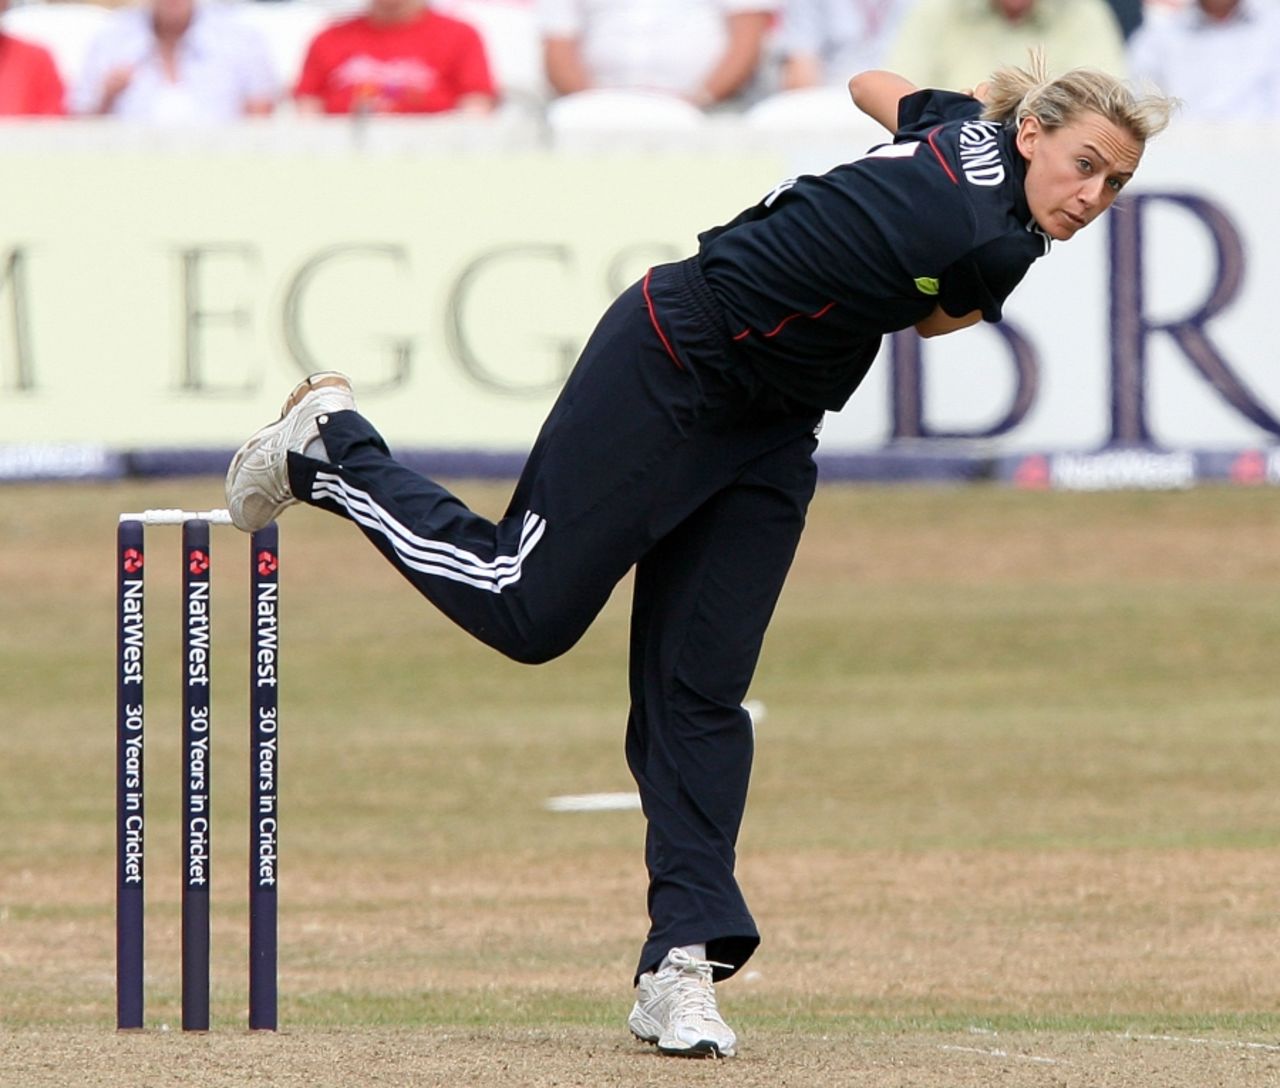 Laura Marsh took the wicket of Sophie Devine but otherwise leaked runs, England v New Zealand, 1st ODI, Taunton, July 10, 2010